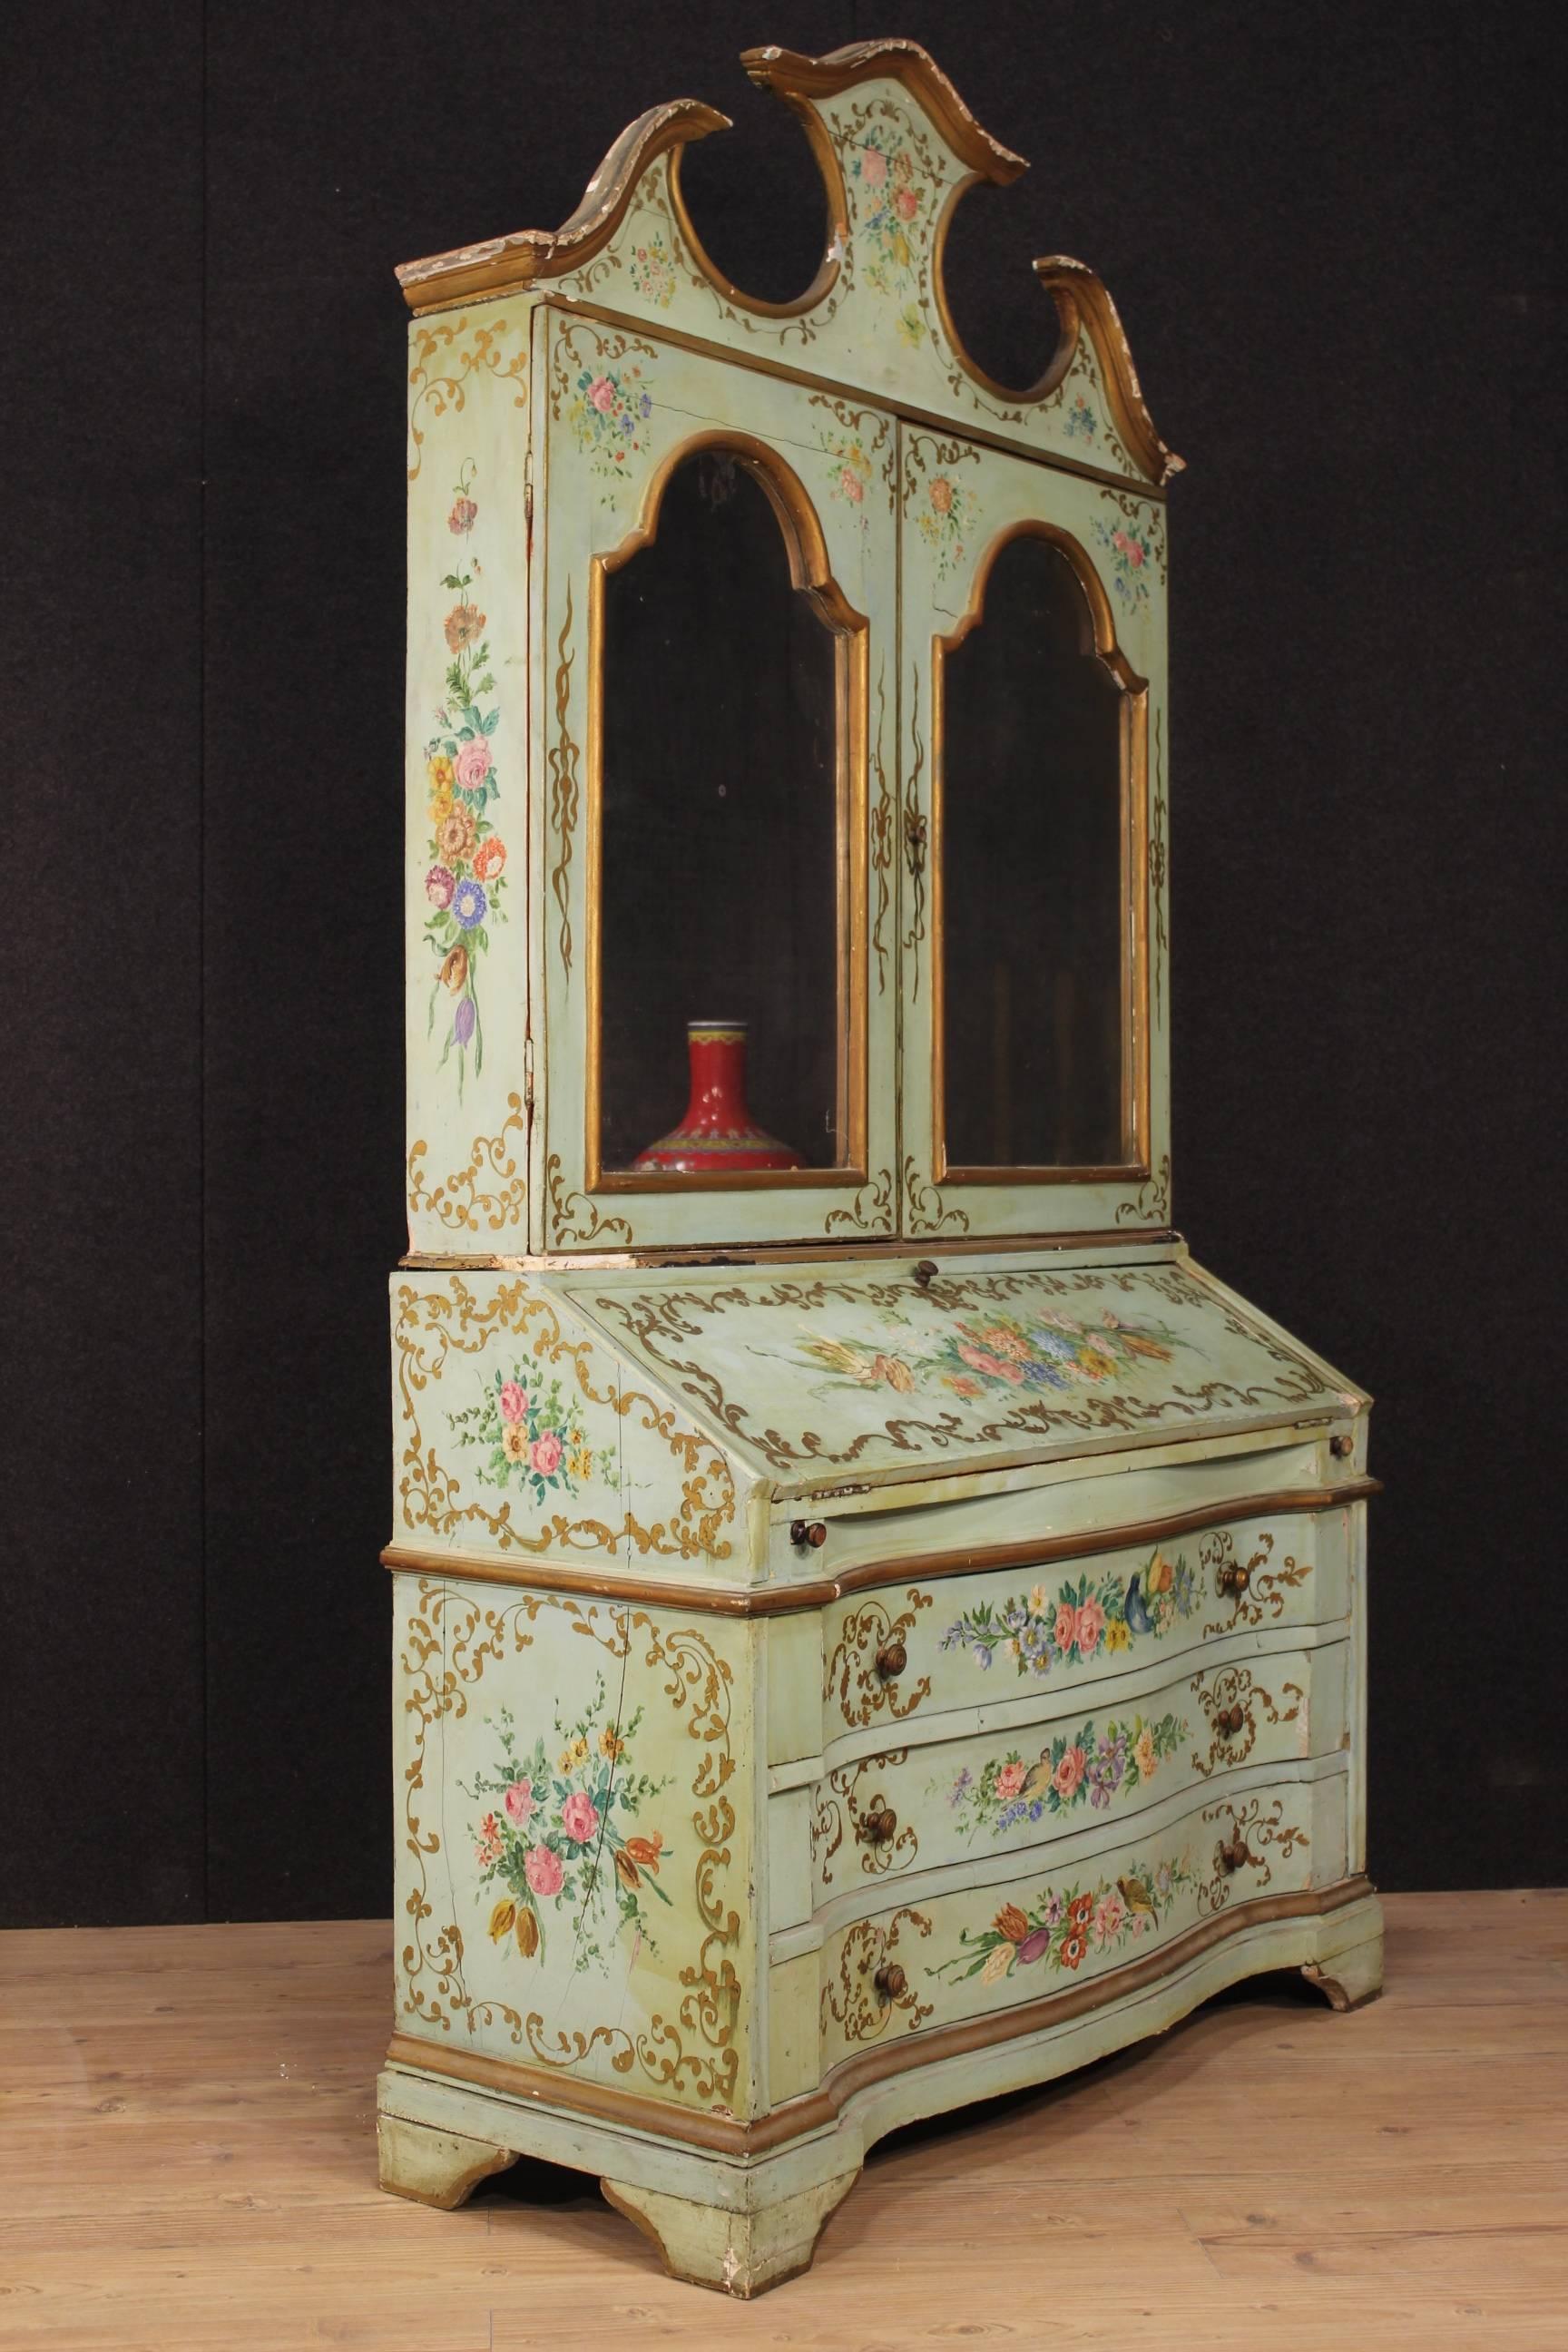 Venetian trumeau from the early 20th century. Furniture in ornately carved, lacquered and painted wood with floral decorations. Venetian trumeau built in two bodies. Lower half with three external drawers, inside with two drawers, one door and a